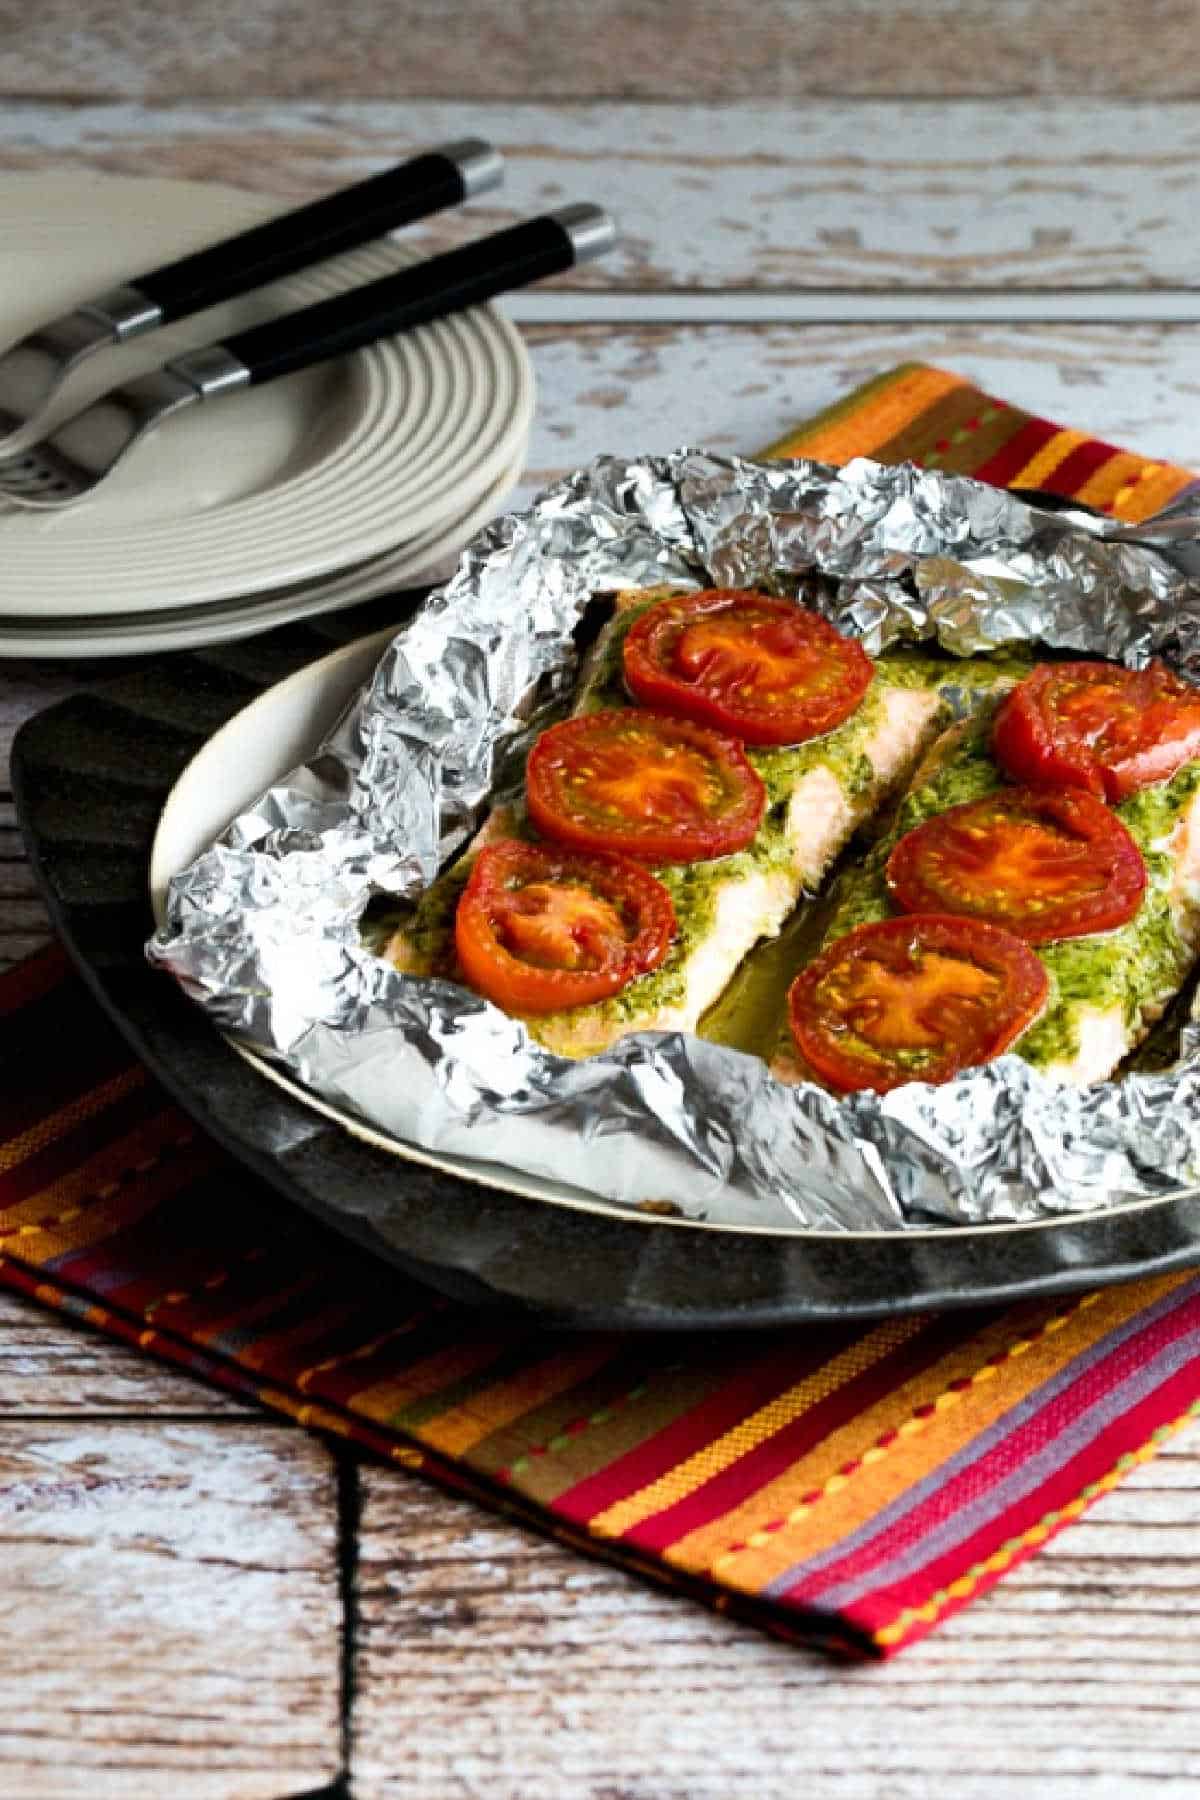 Baked Salmon with Pesto and Tomatoes shown in foil on serving plate